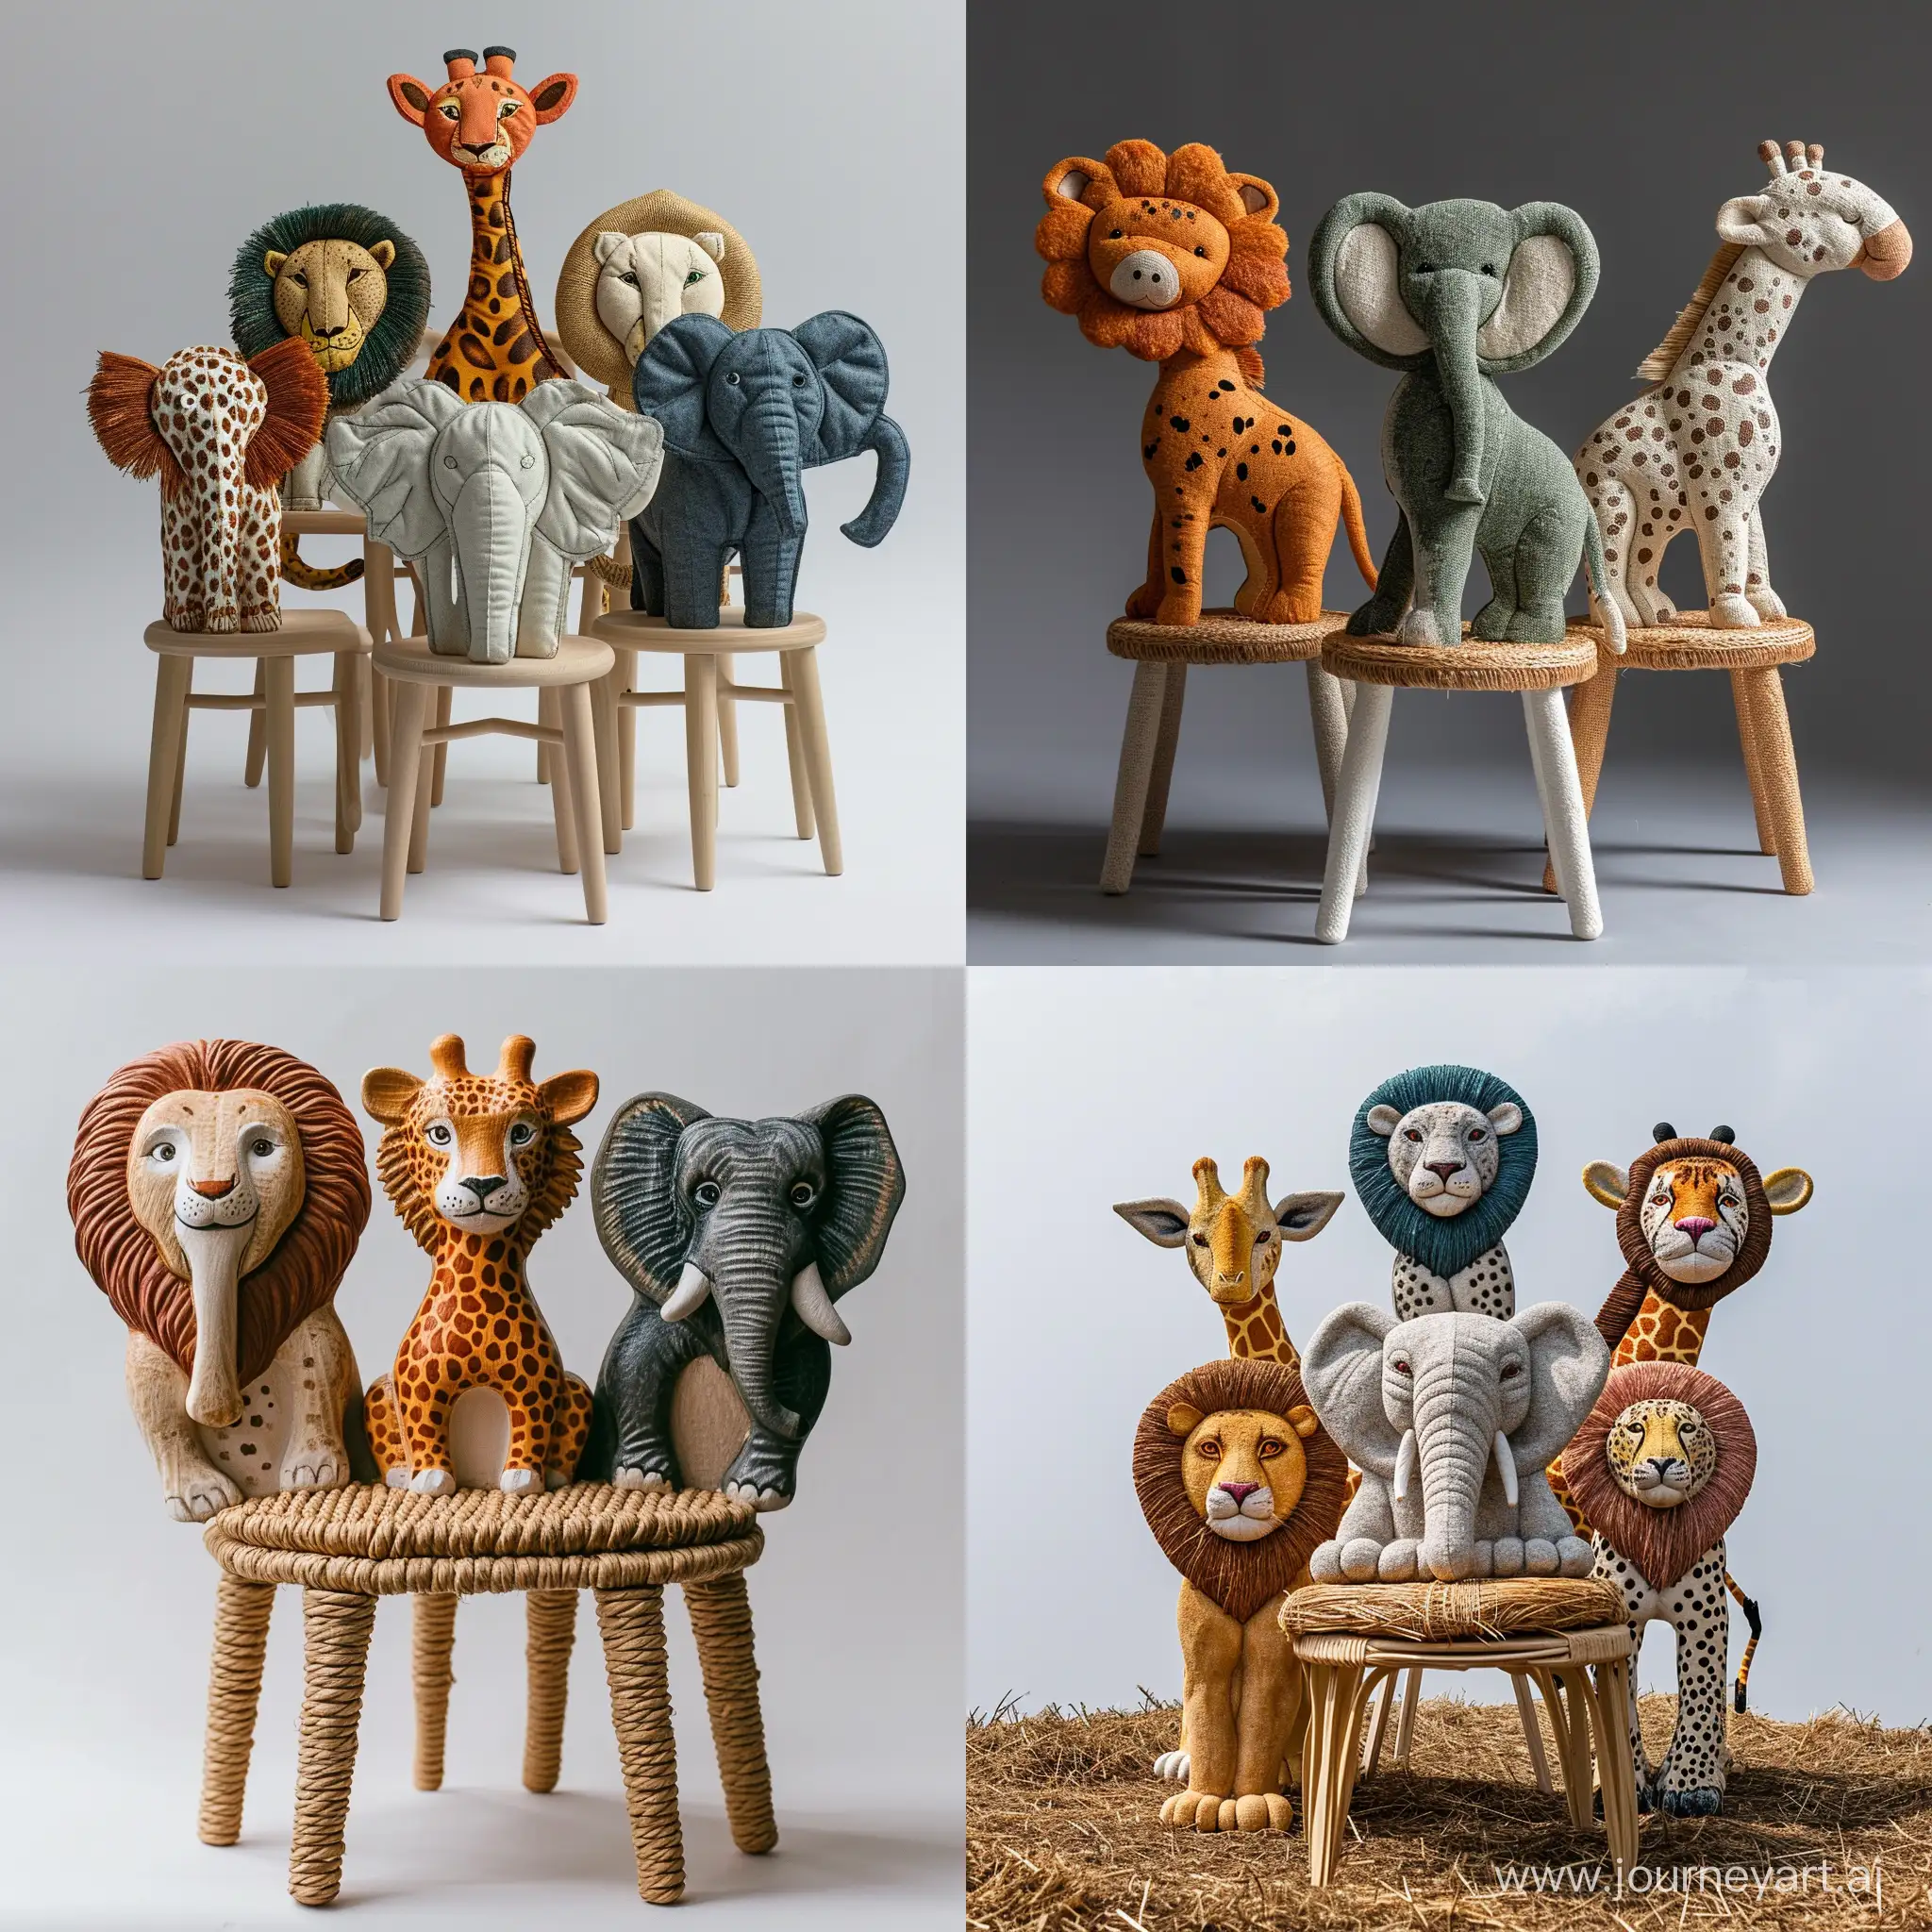 imagine an image of a cute stackable sturdy children’s  chair inspired by beautiful perfect safari animals(lion, elephant, giraffe, tiger,cheetah), with backrests shaped like different safari animals. Use recycled wood for the frame and woven plant fibers for seating areas, depicted in colors representative of the chosen animals. The seat should stand approximately 30cm tall, built to educate about wildlife and ensure durability.realistic style